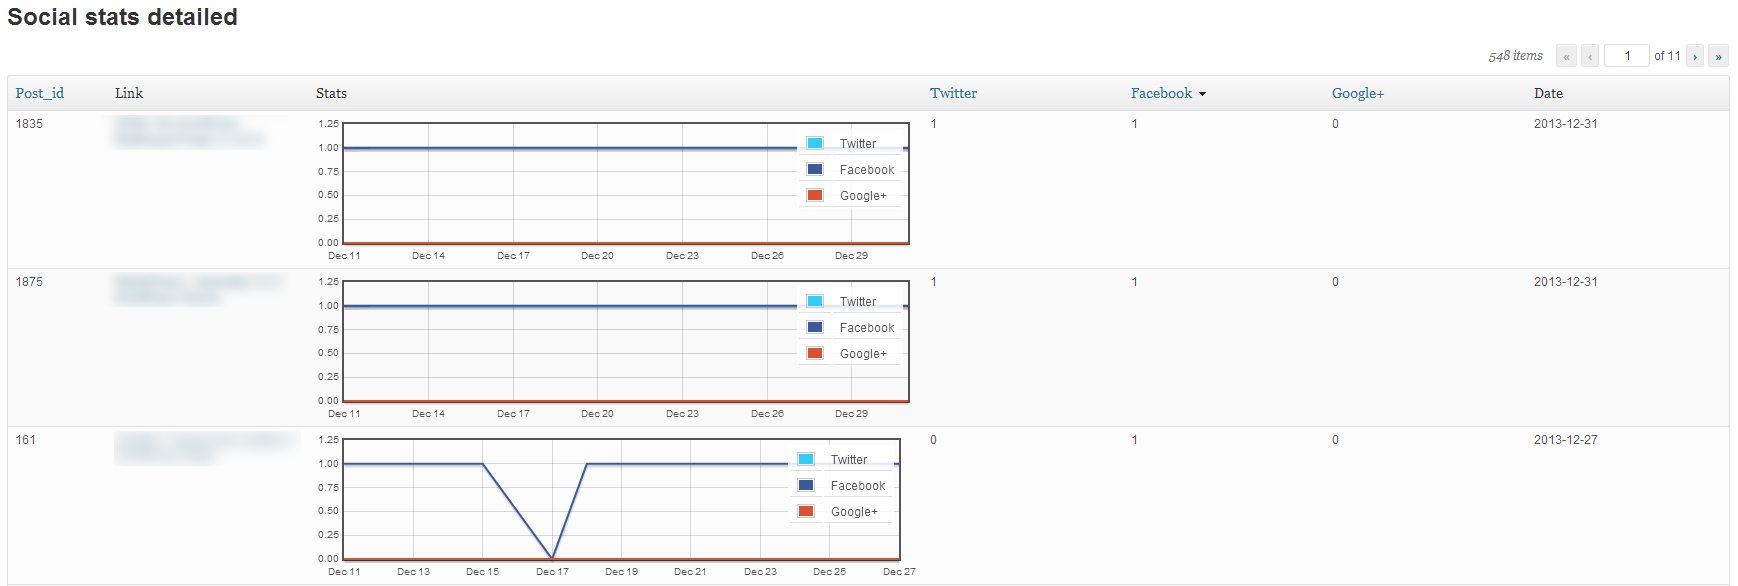 Stats per post: display all posts on the site, each post and its stats. ability to sort by most: likes/pluses/tweets.